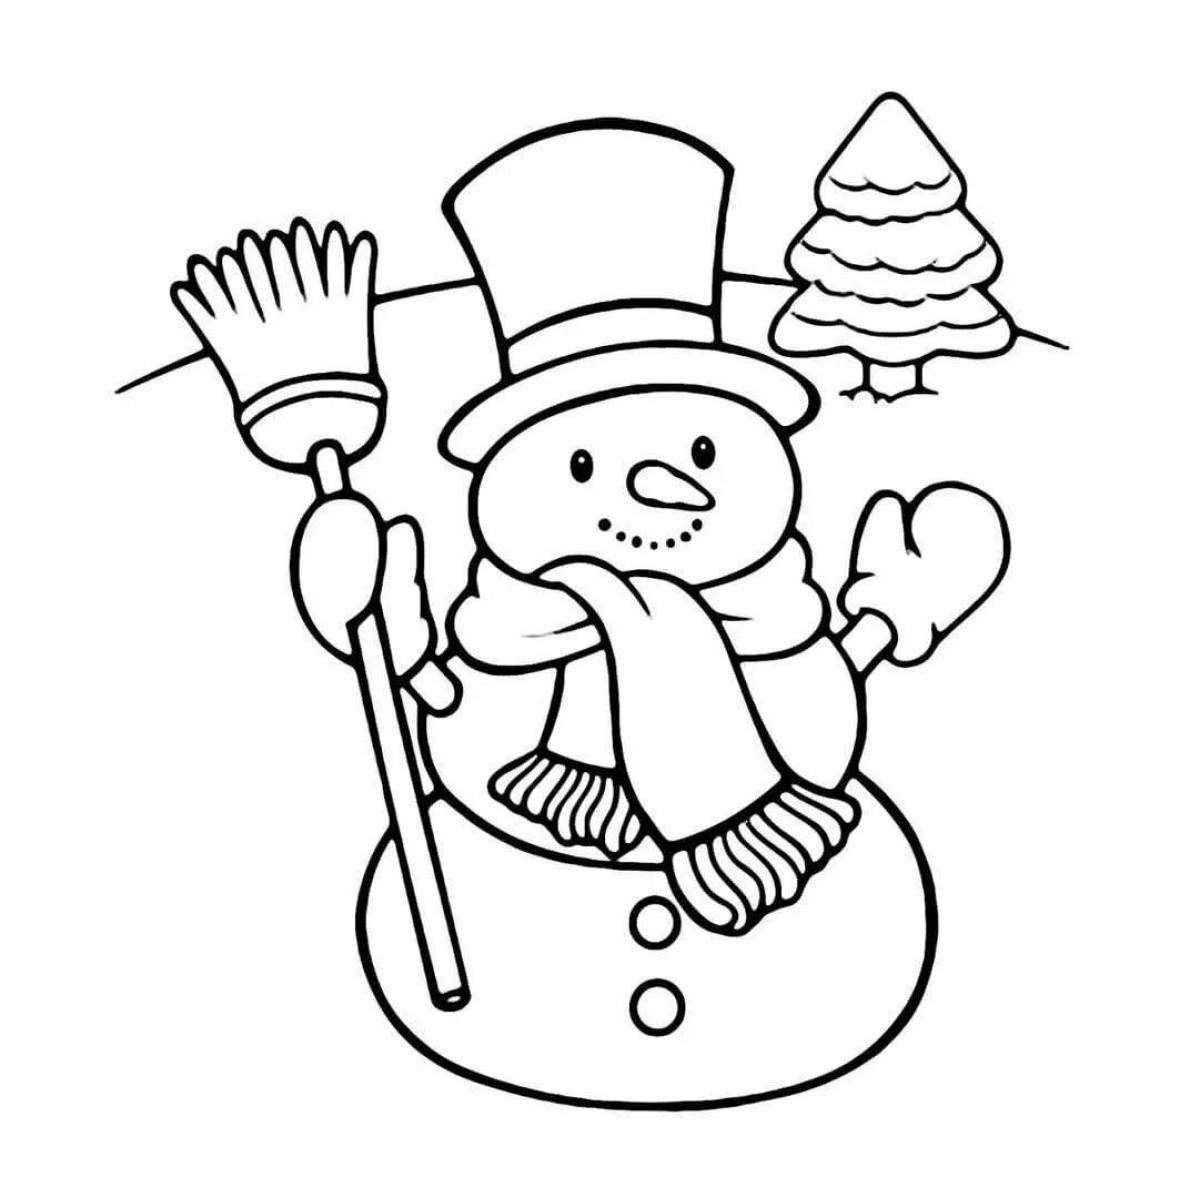 Awesome coloring cute snowman